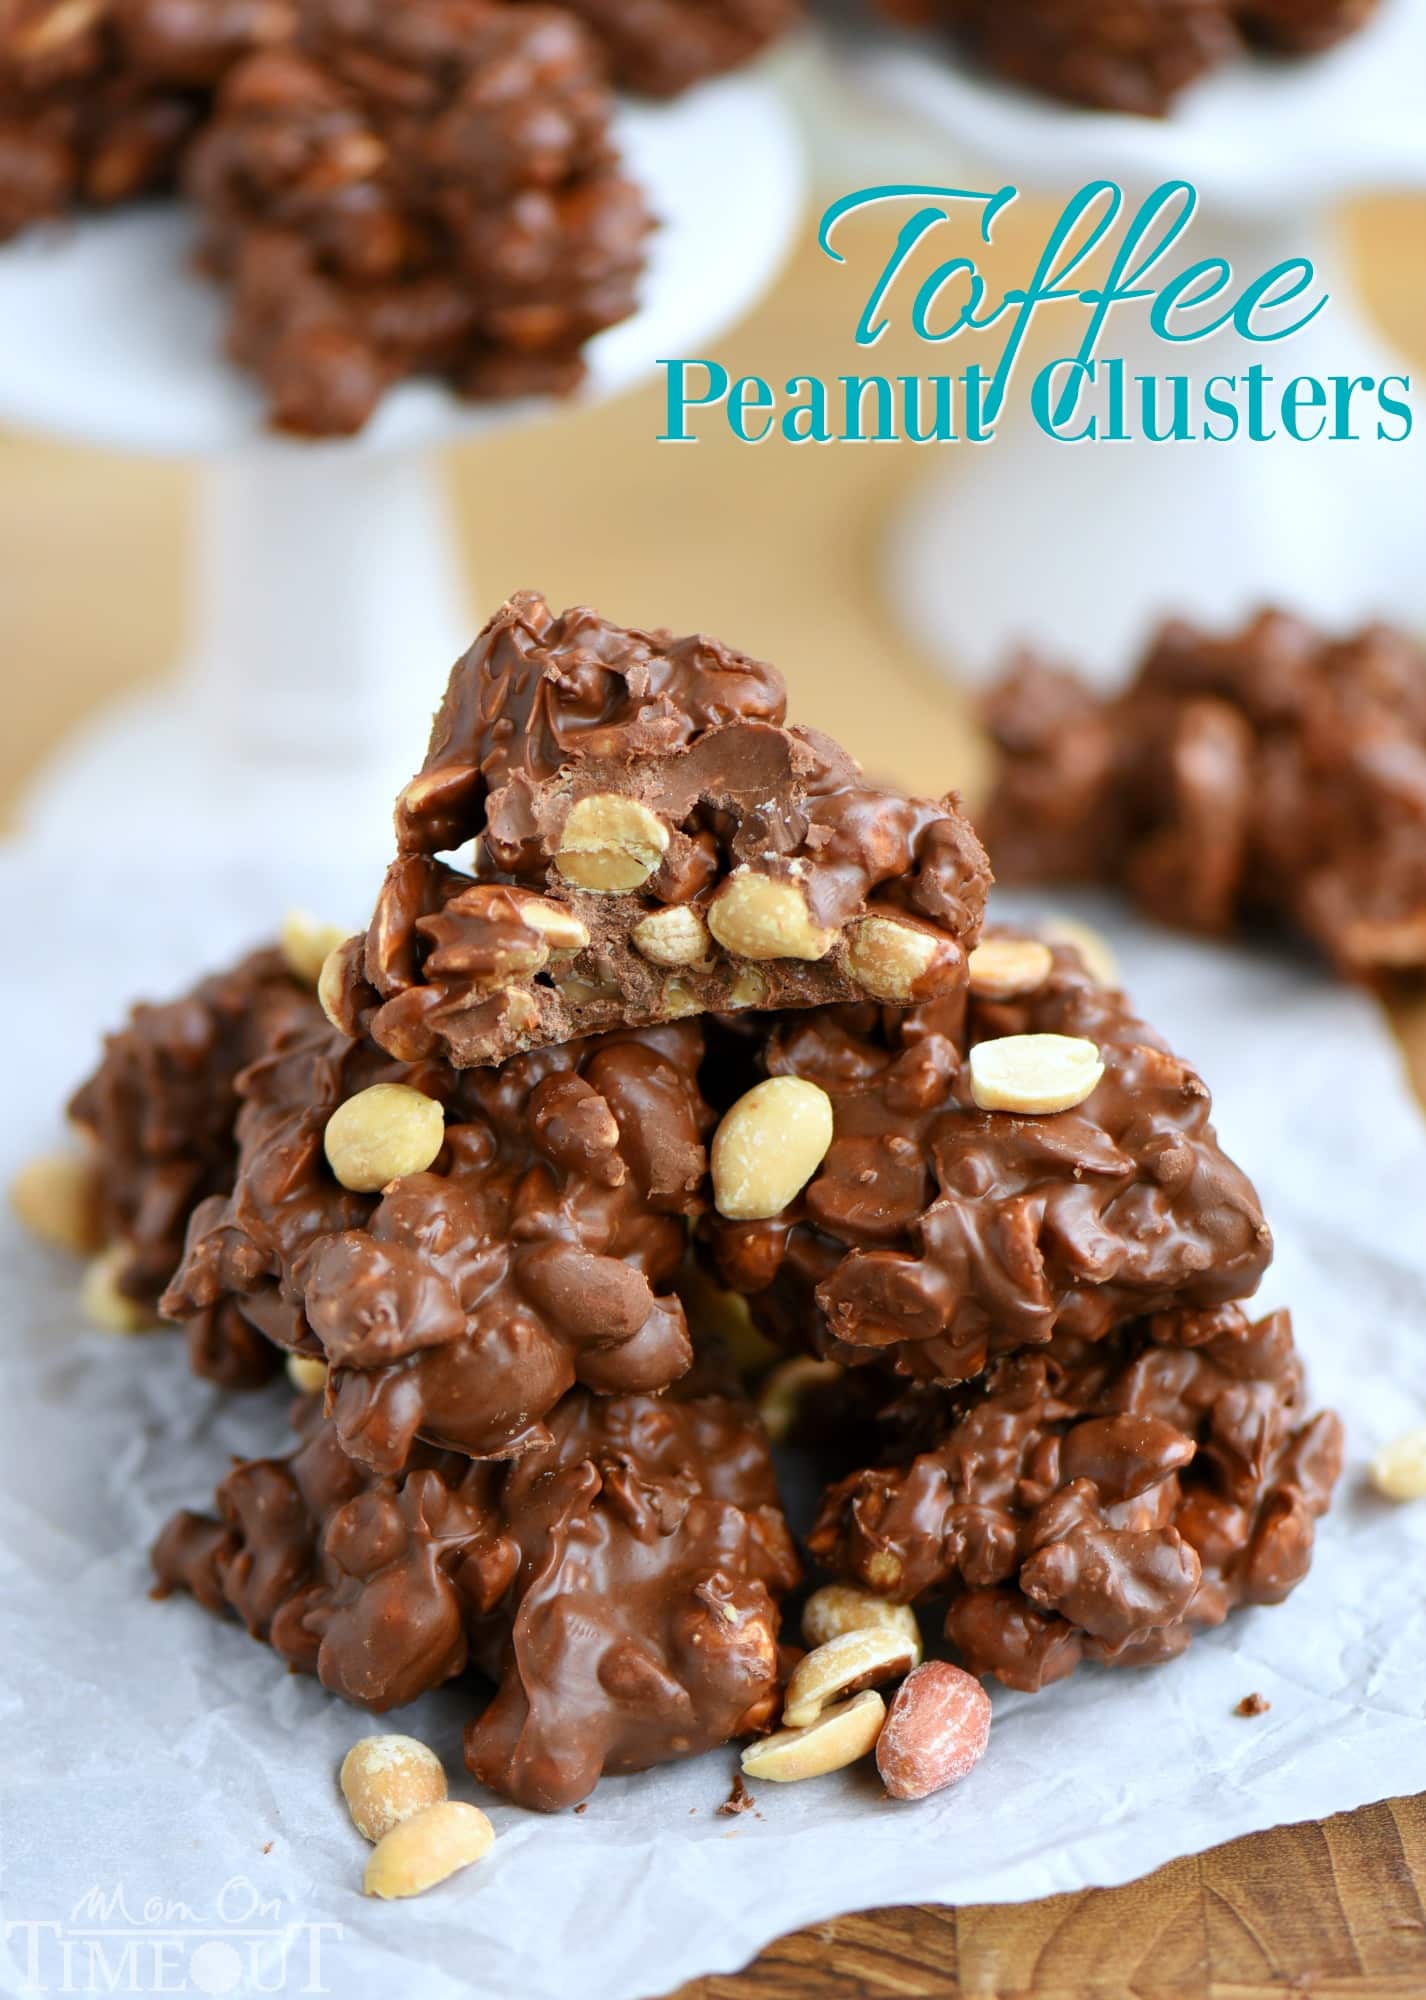 These Toffee Peanut Clusters are made in the microwave and use only FIVE ingredients! A simple, delicious, easy candy recipe that everyone will enjoy! Great for gifts! // Mom On Timeout